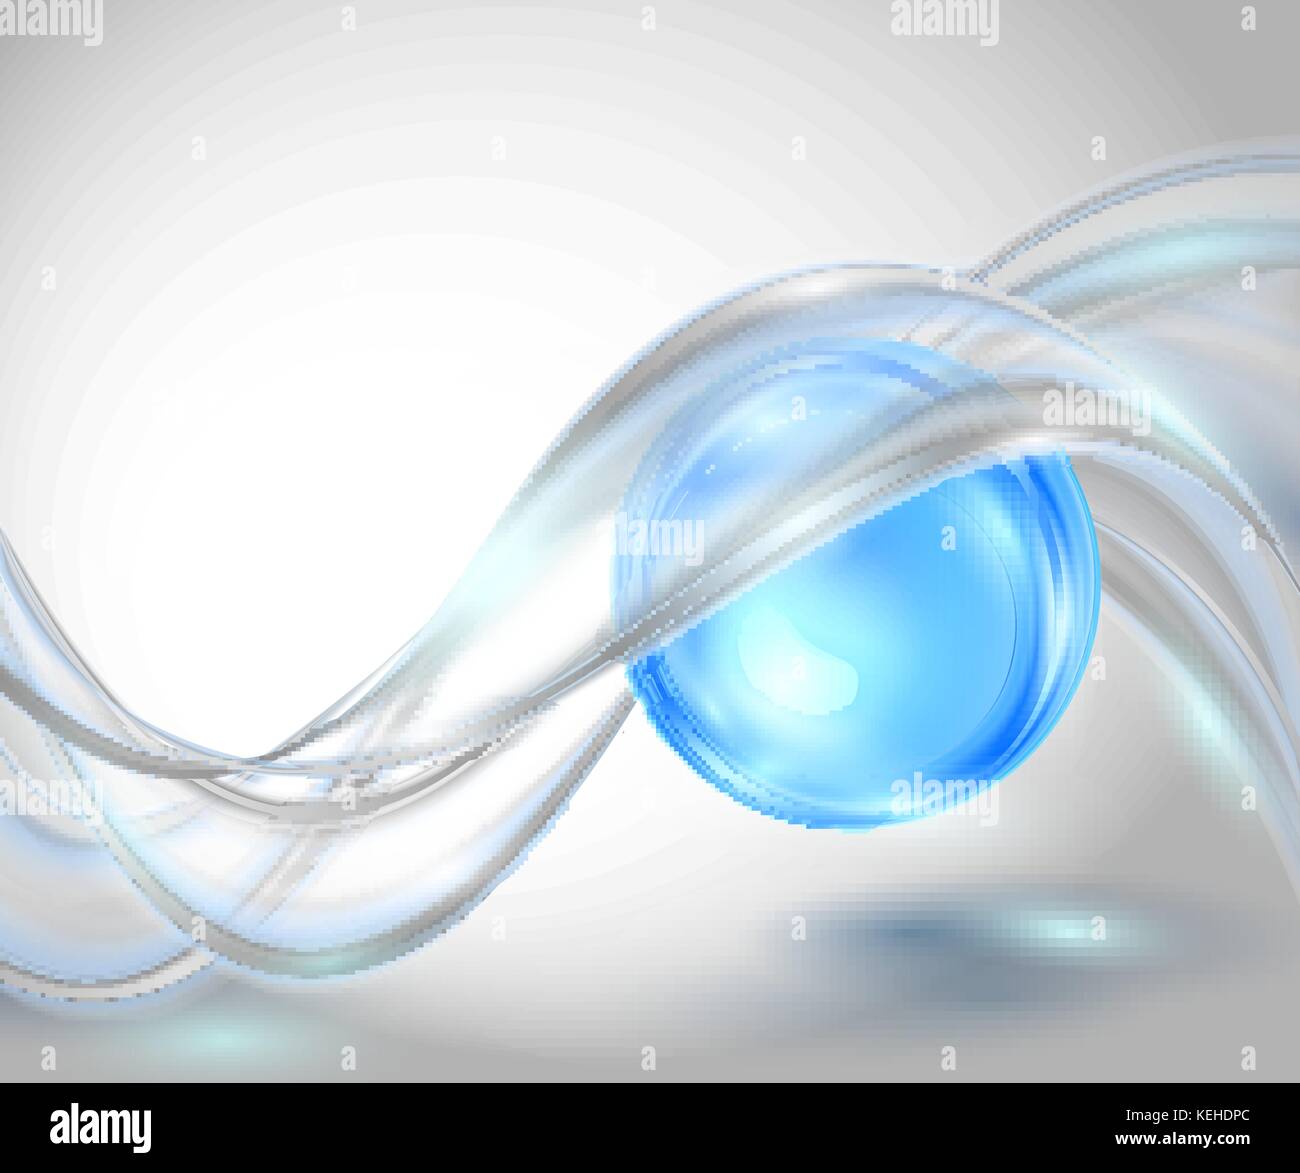 Abstract gray waving background with blue ball Stock Vector